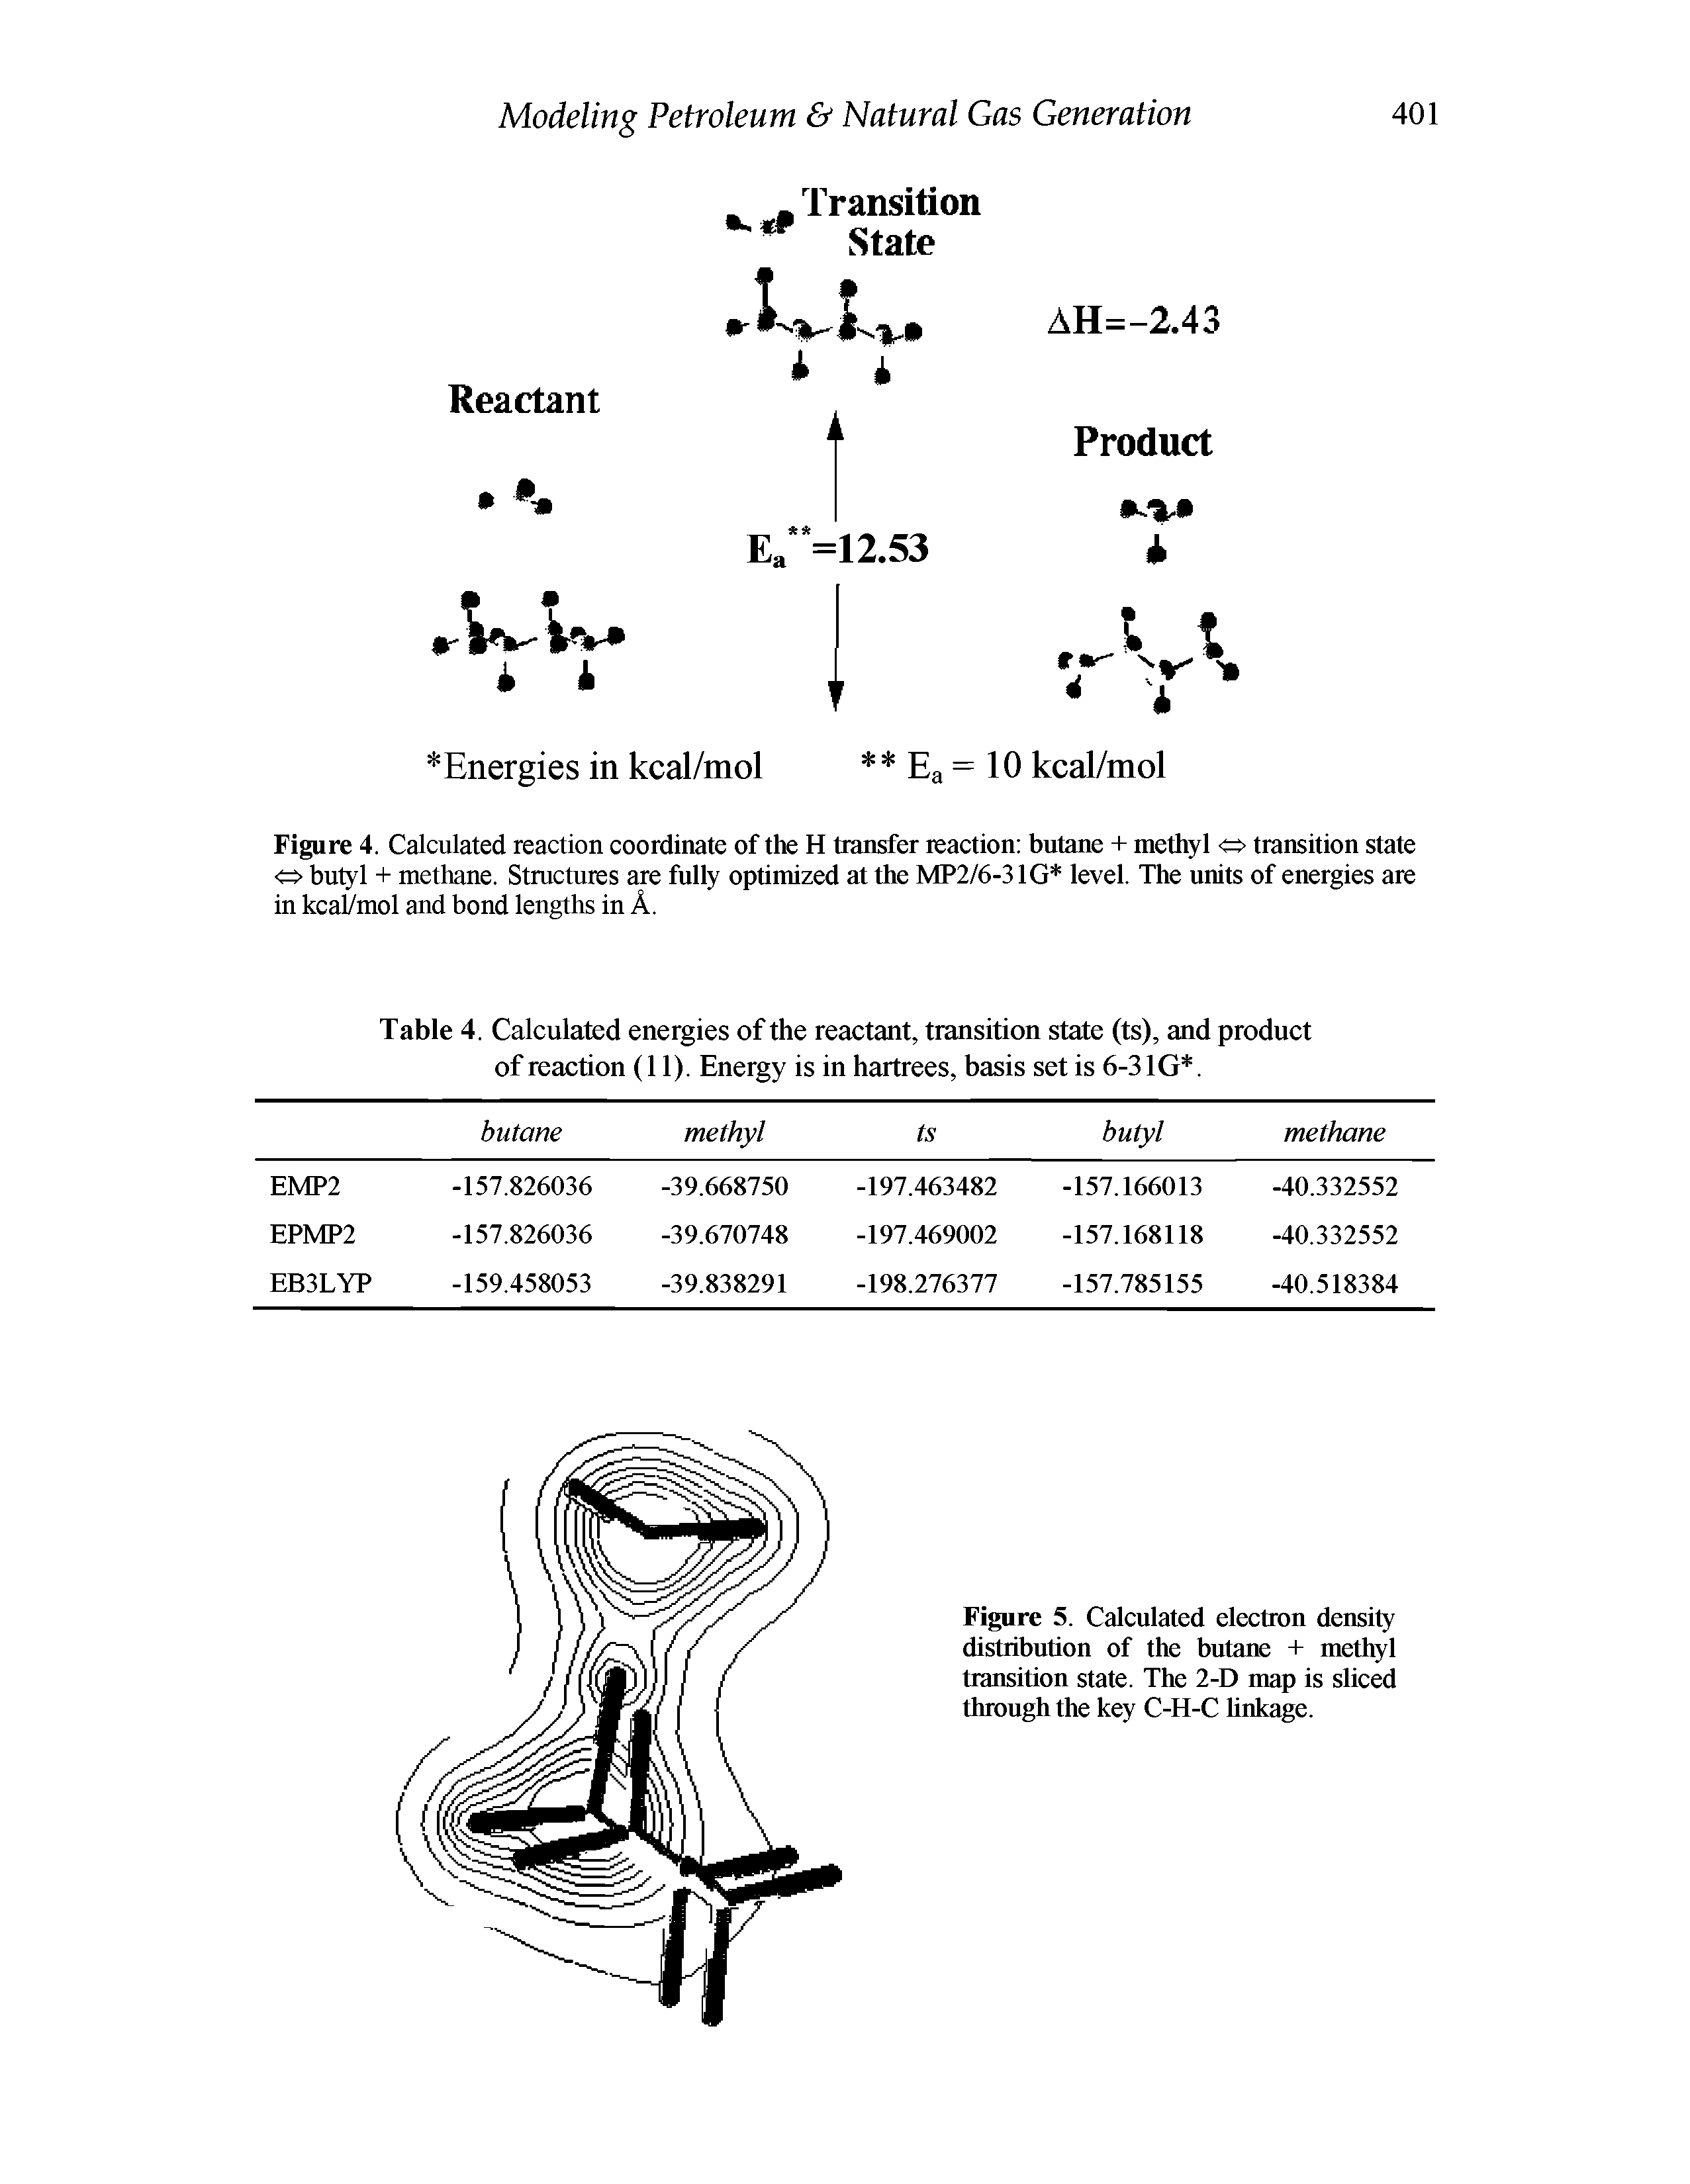 Figure 4. Calculated reaction coordinate of the H transfer reaetion butane + methyl <=> transition state o butyl + methane. Structures are fully optimized at the MP2/6-3IG level. The units of energies are in kcal/mol and bond lengths in A.